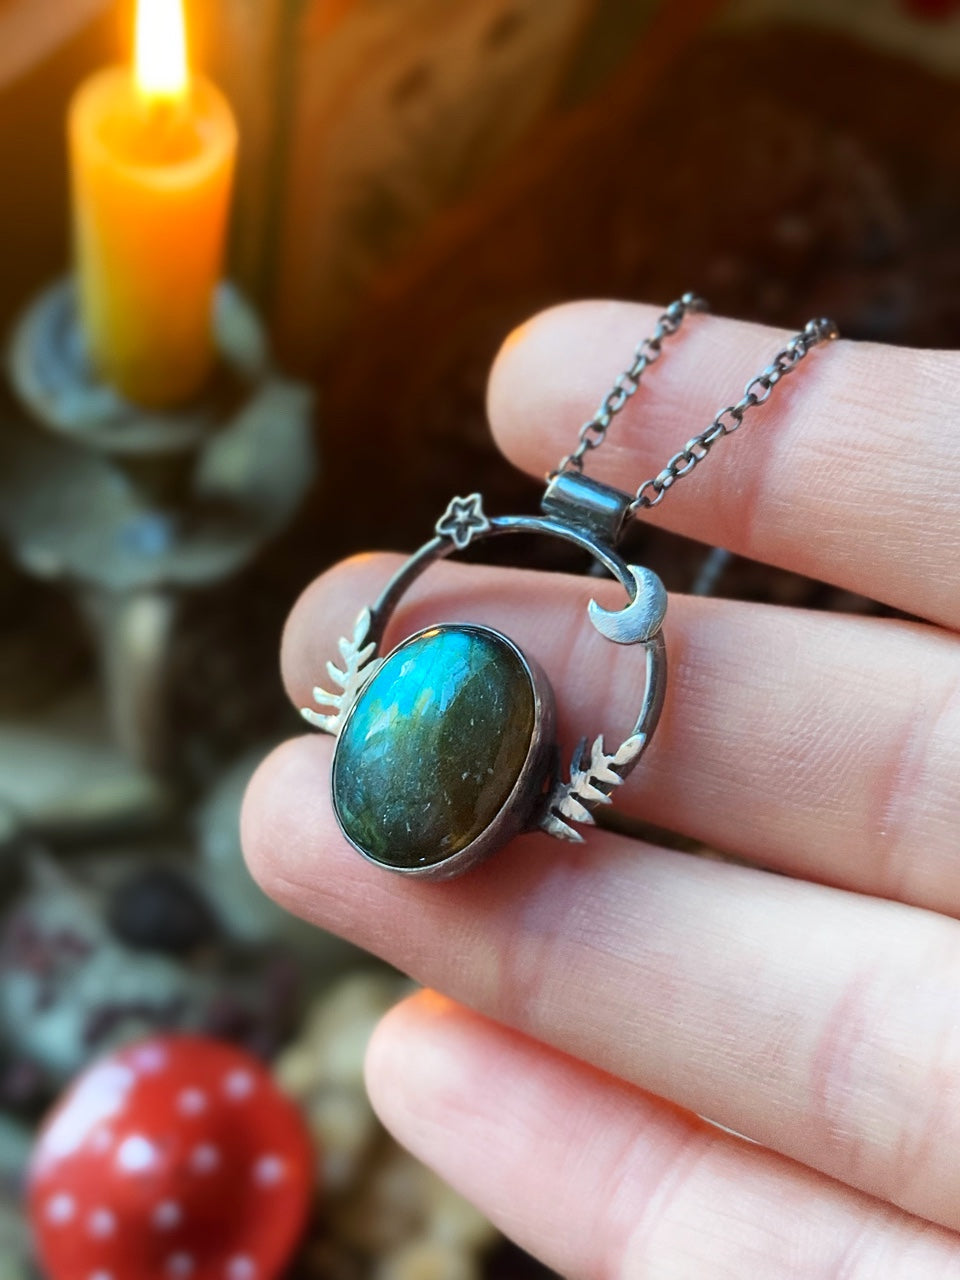 MYSTICAL MARSHES Handmade Sterling Silver Necklace with Labradorite